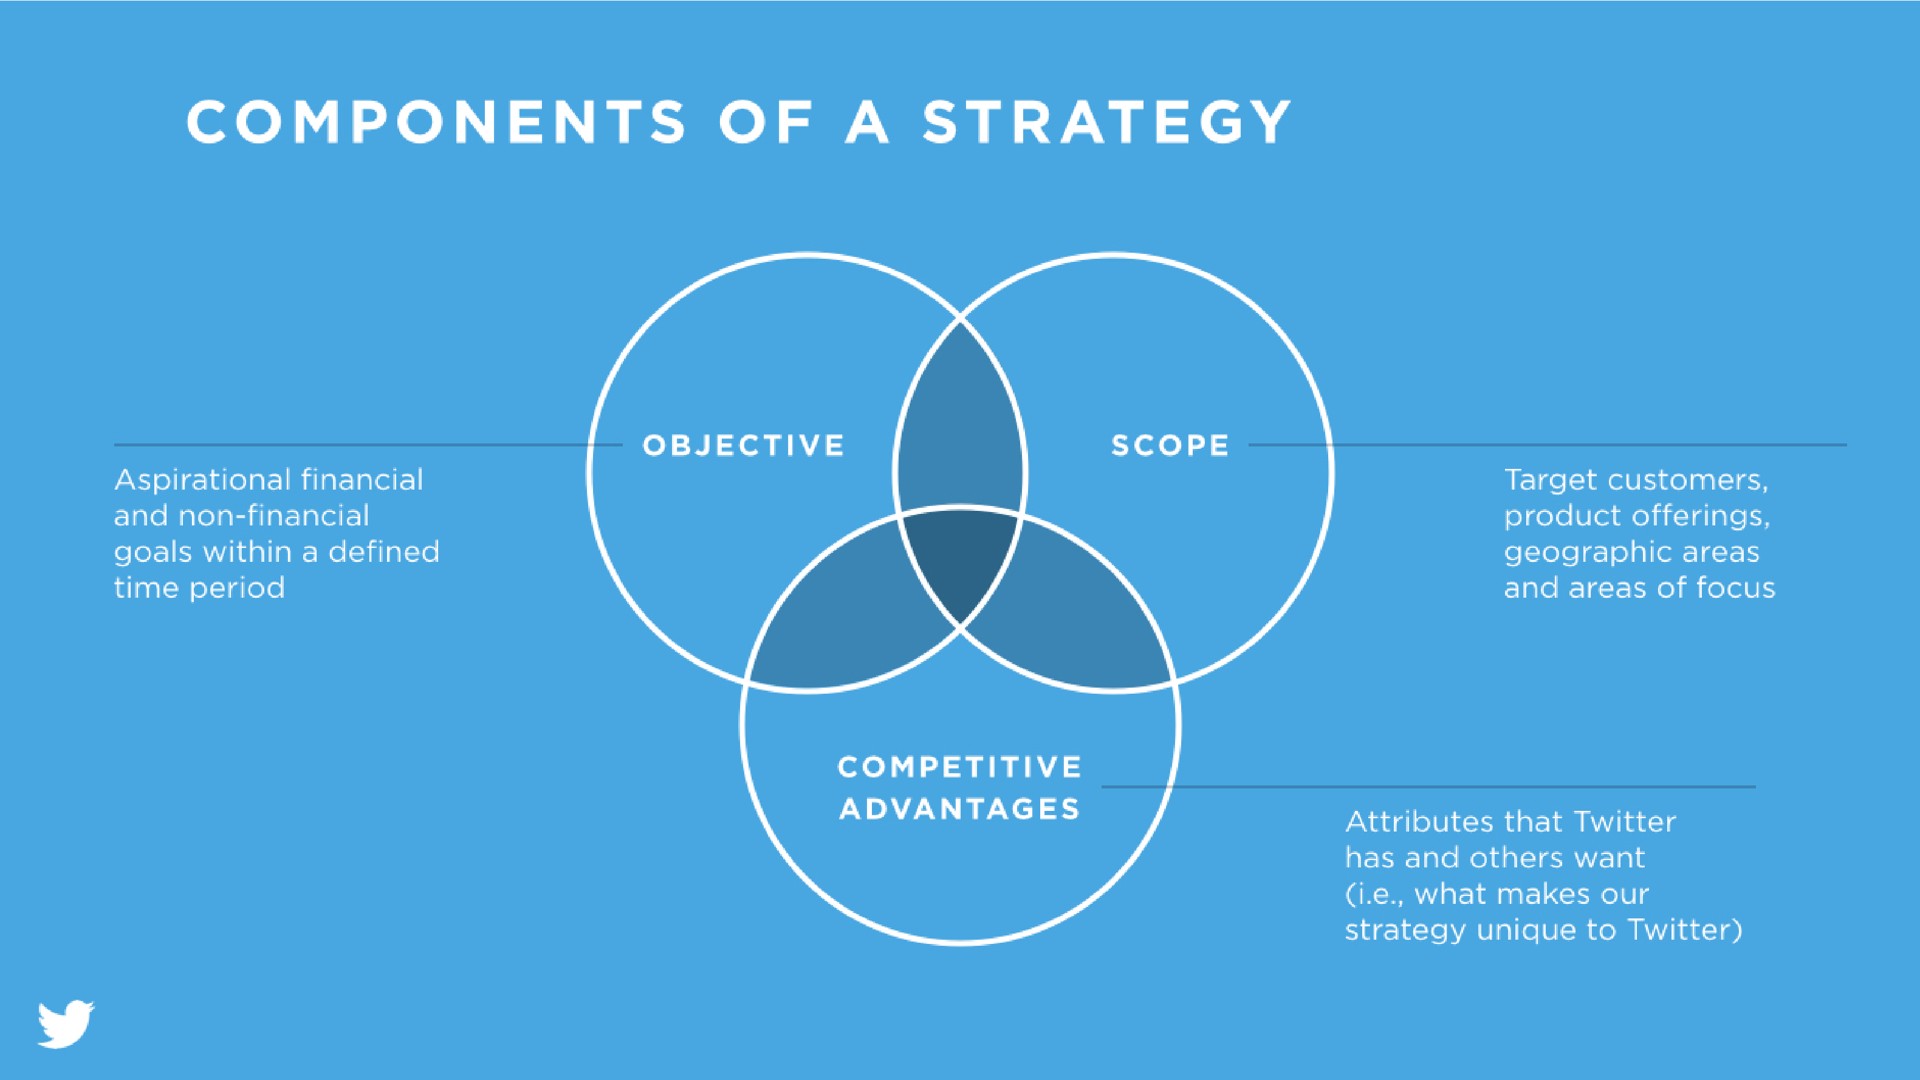 components of a strategy | Twitter